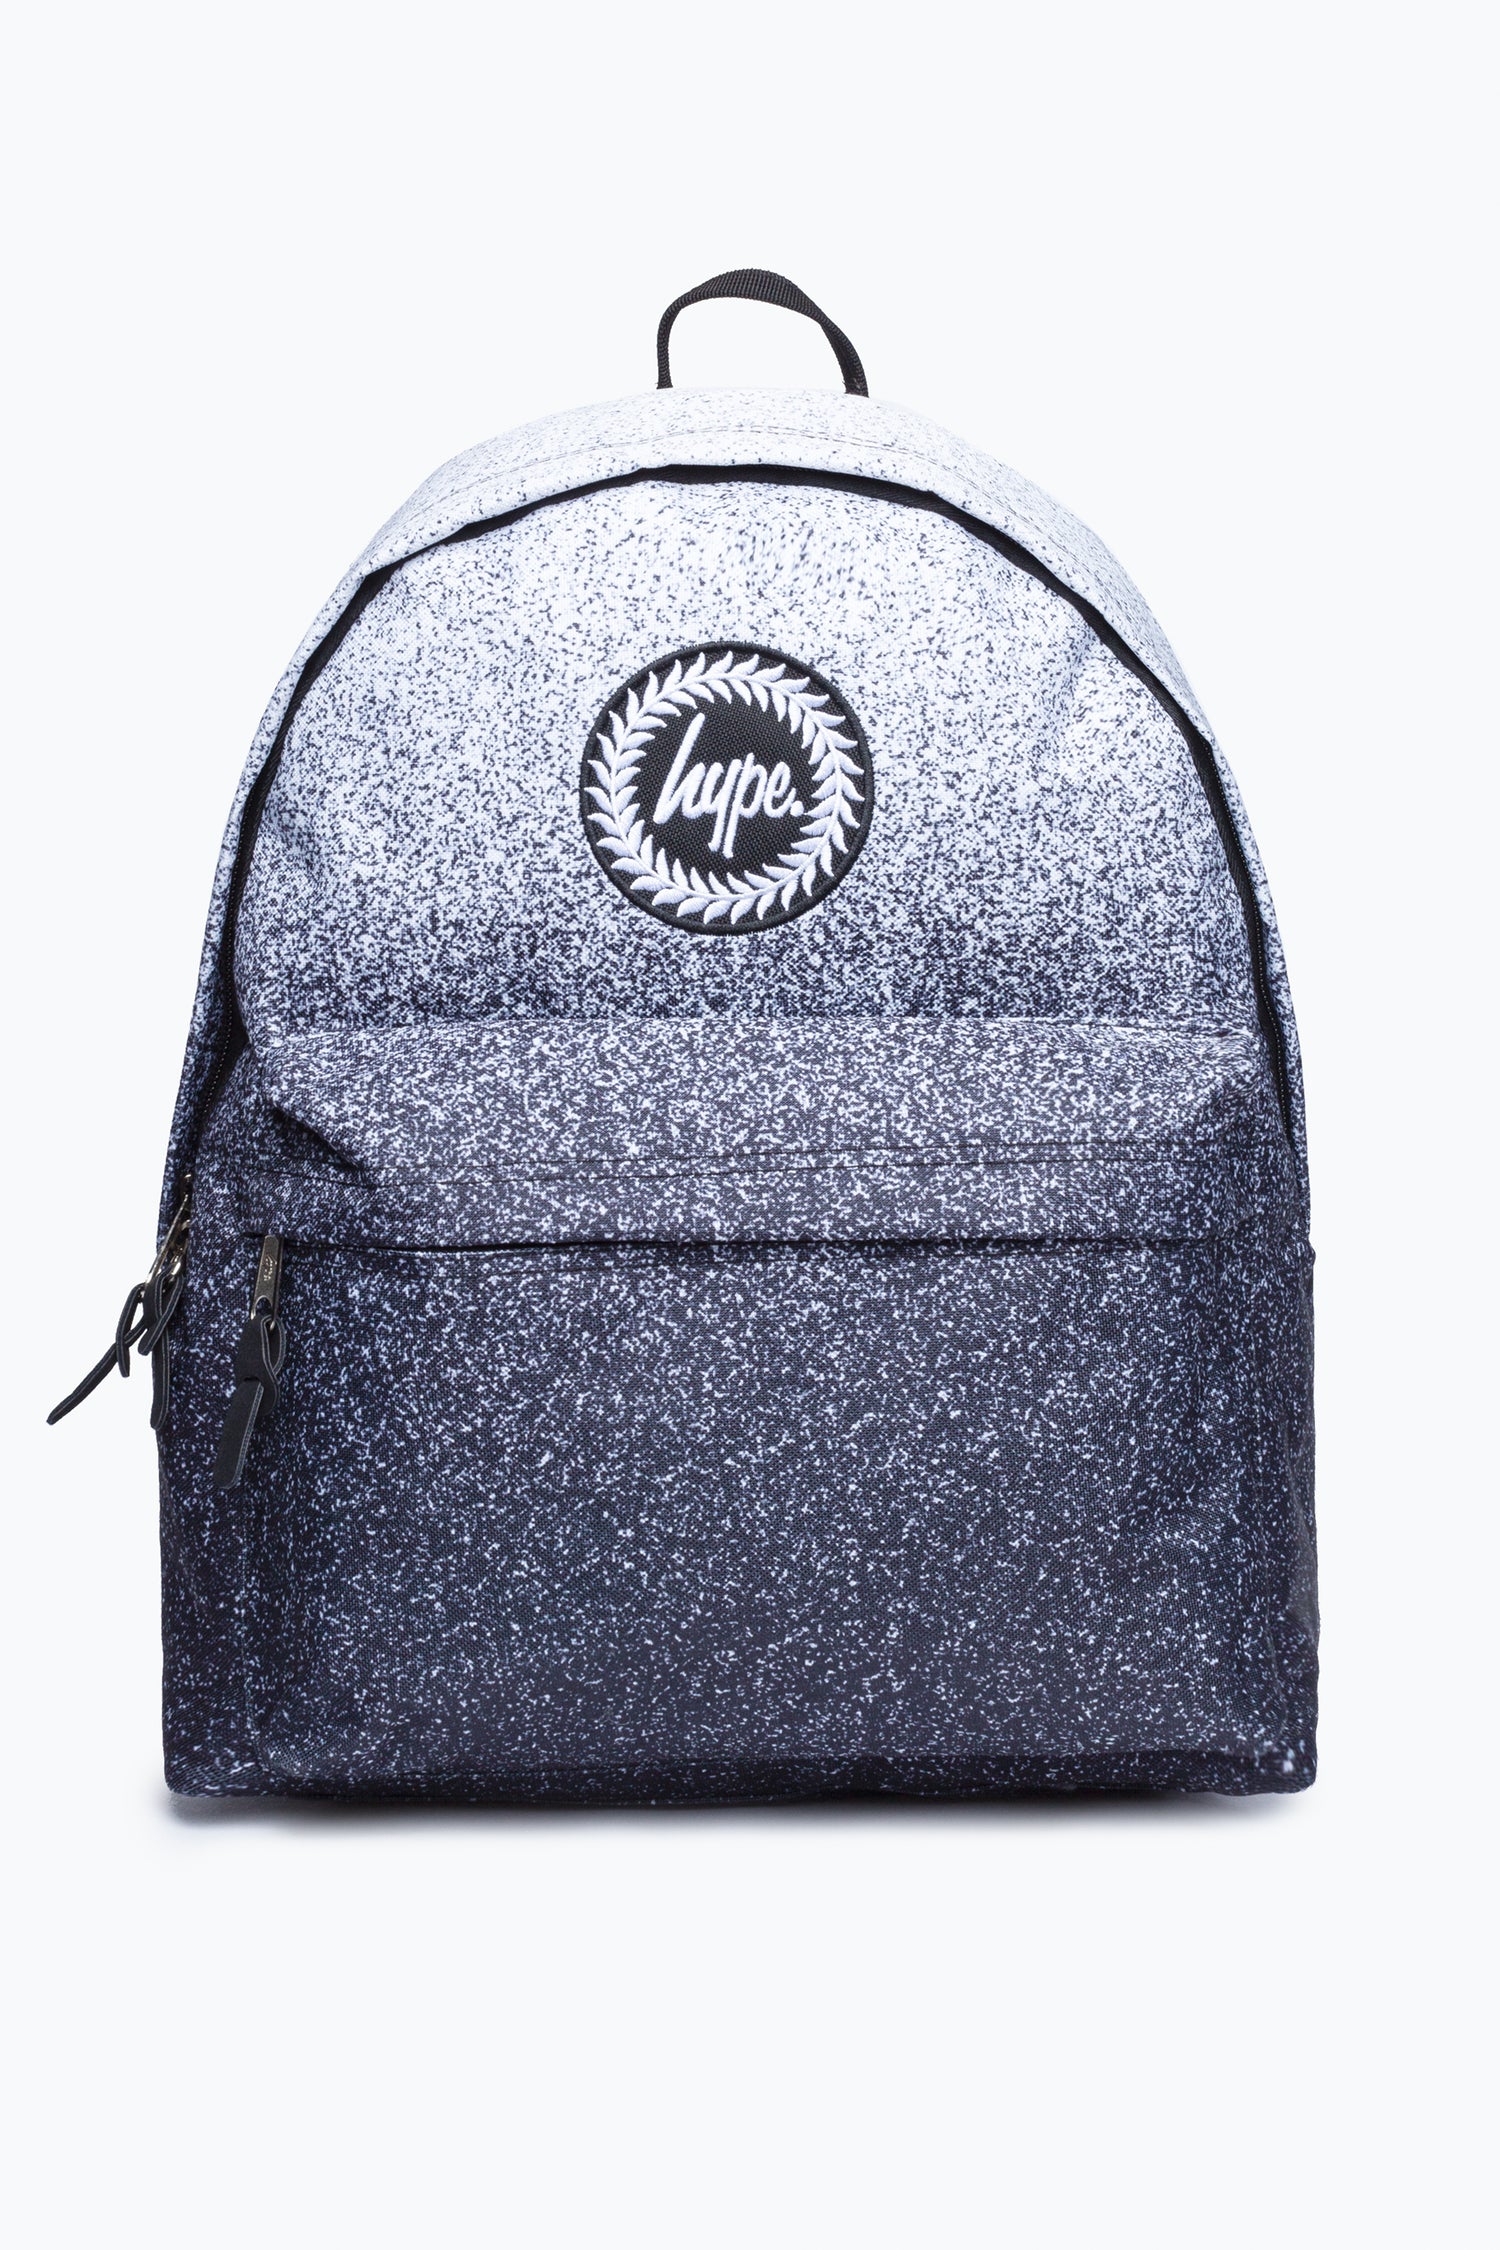 Cyber Monday Upto 50% off Backpacks